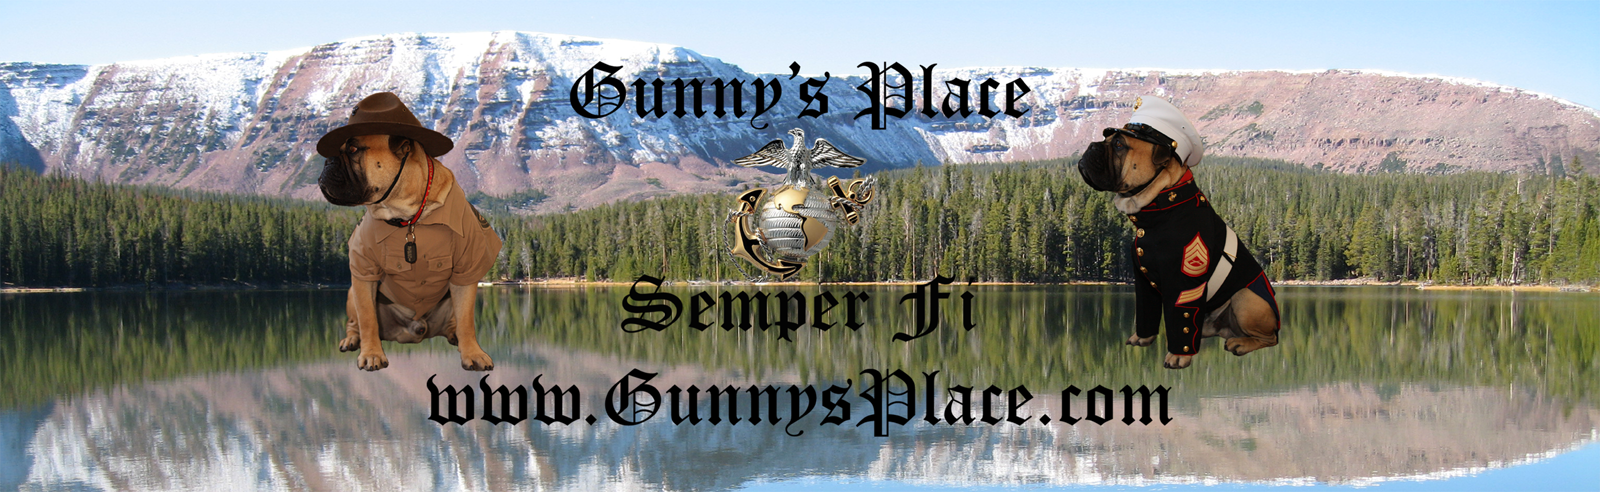 Gunny's Place